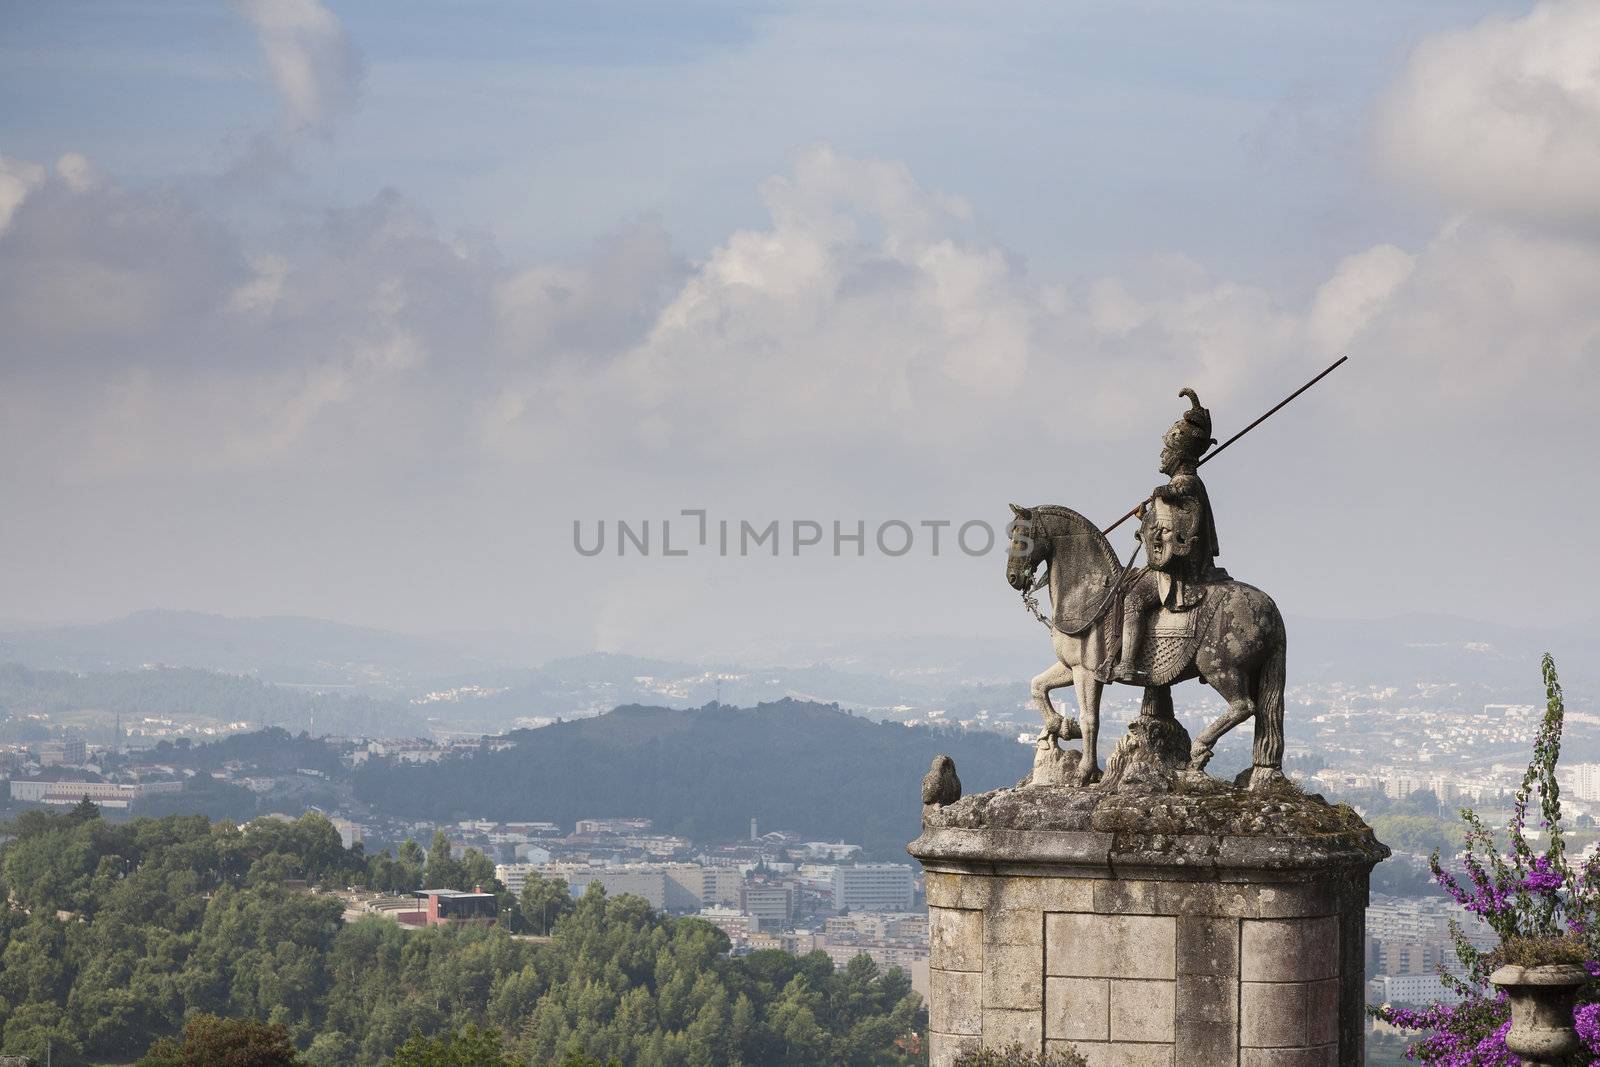 Equestrian statue of Saint Longinus in front of Bom Jesus do Monte with Braga, Portugal in the background.